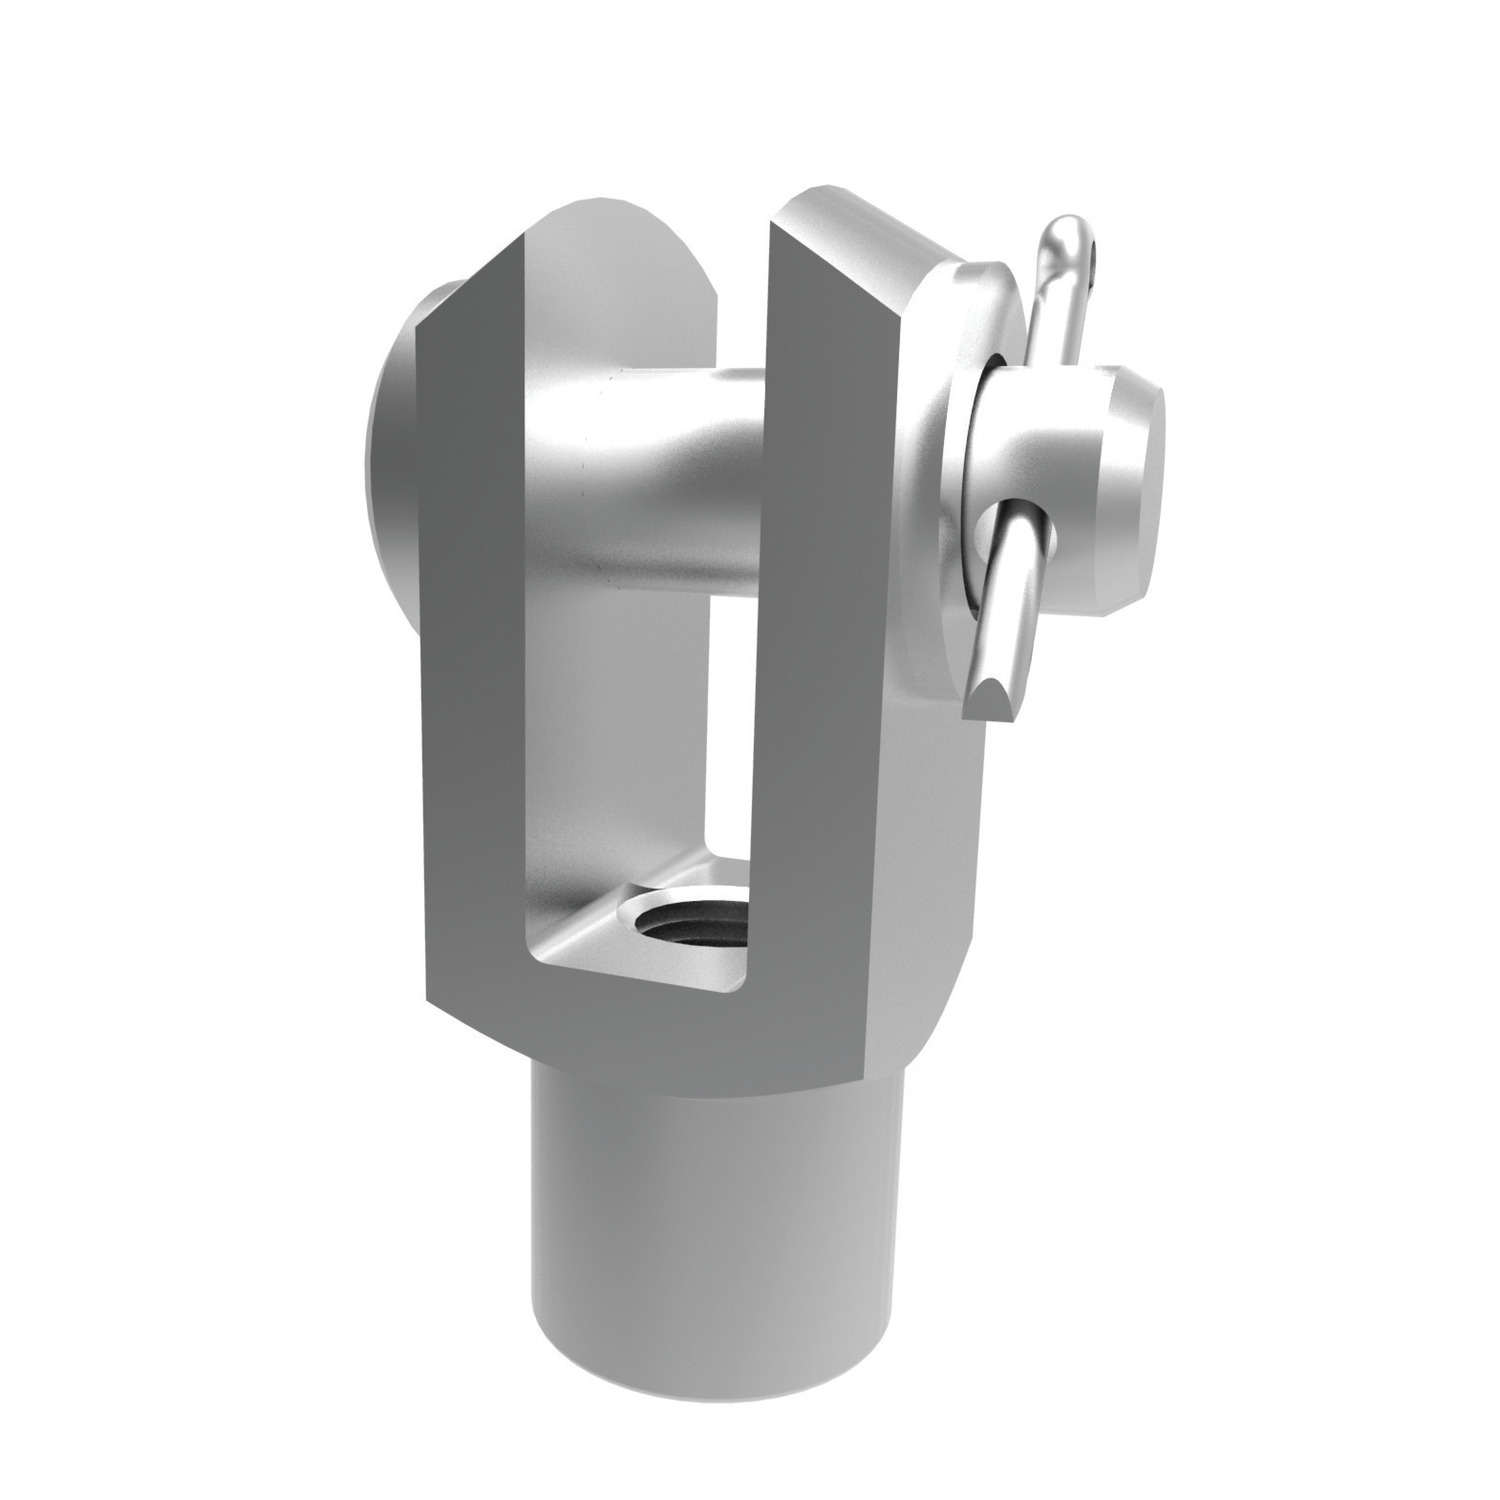 Steel Clevis Joints with Pin Left hand thread Steel clevis joint with clevis pin, washer and split cotter pin.